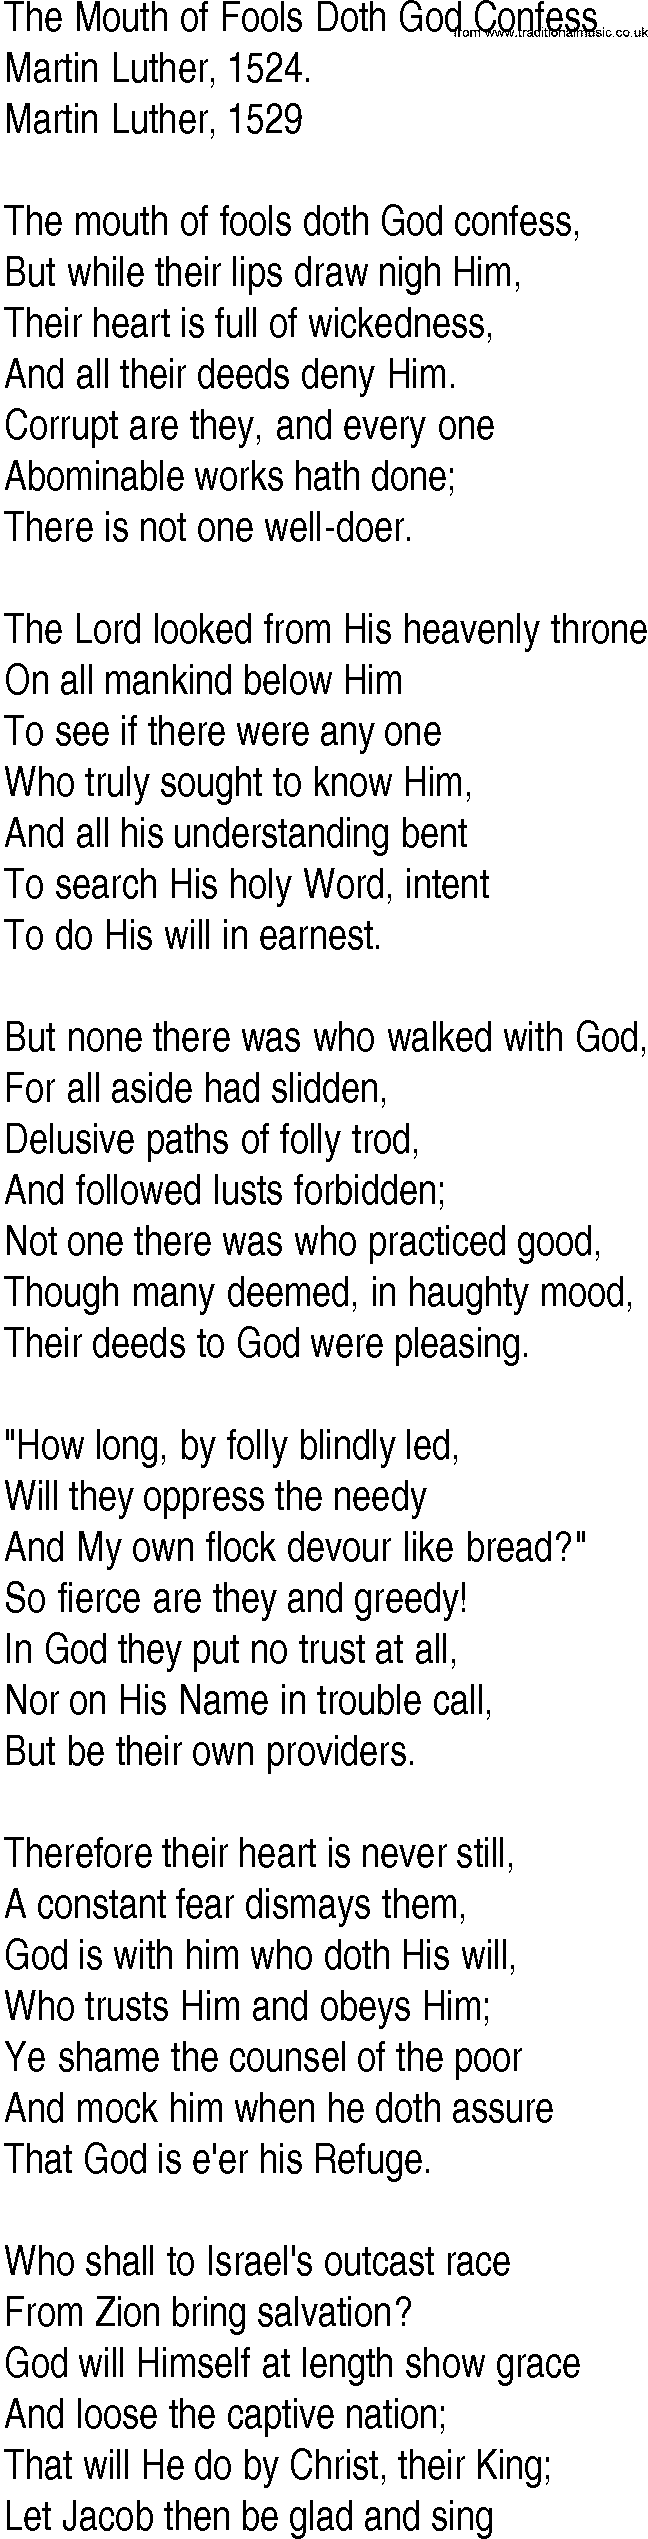 Hymn and Gospel Song: The Mouth of Fools Doth God Confess by Martin Luther lyrics